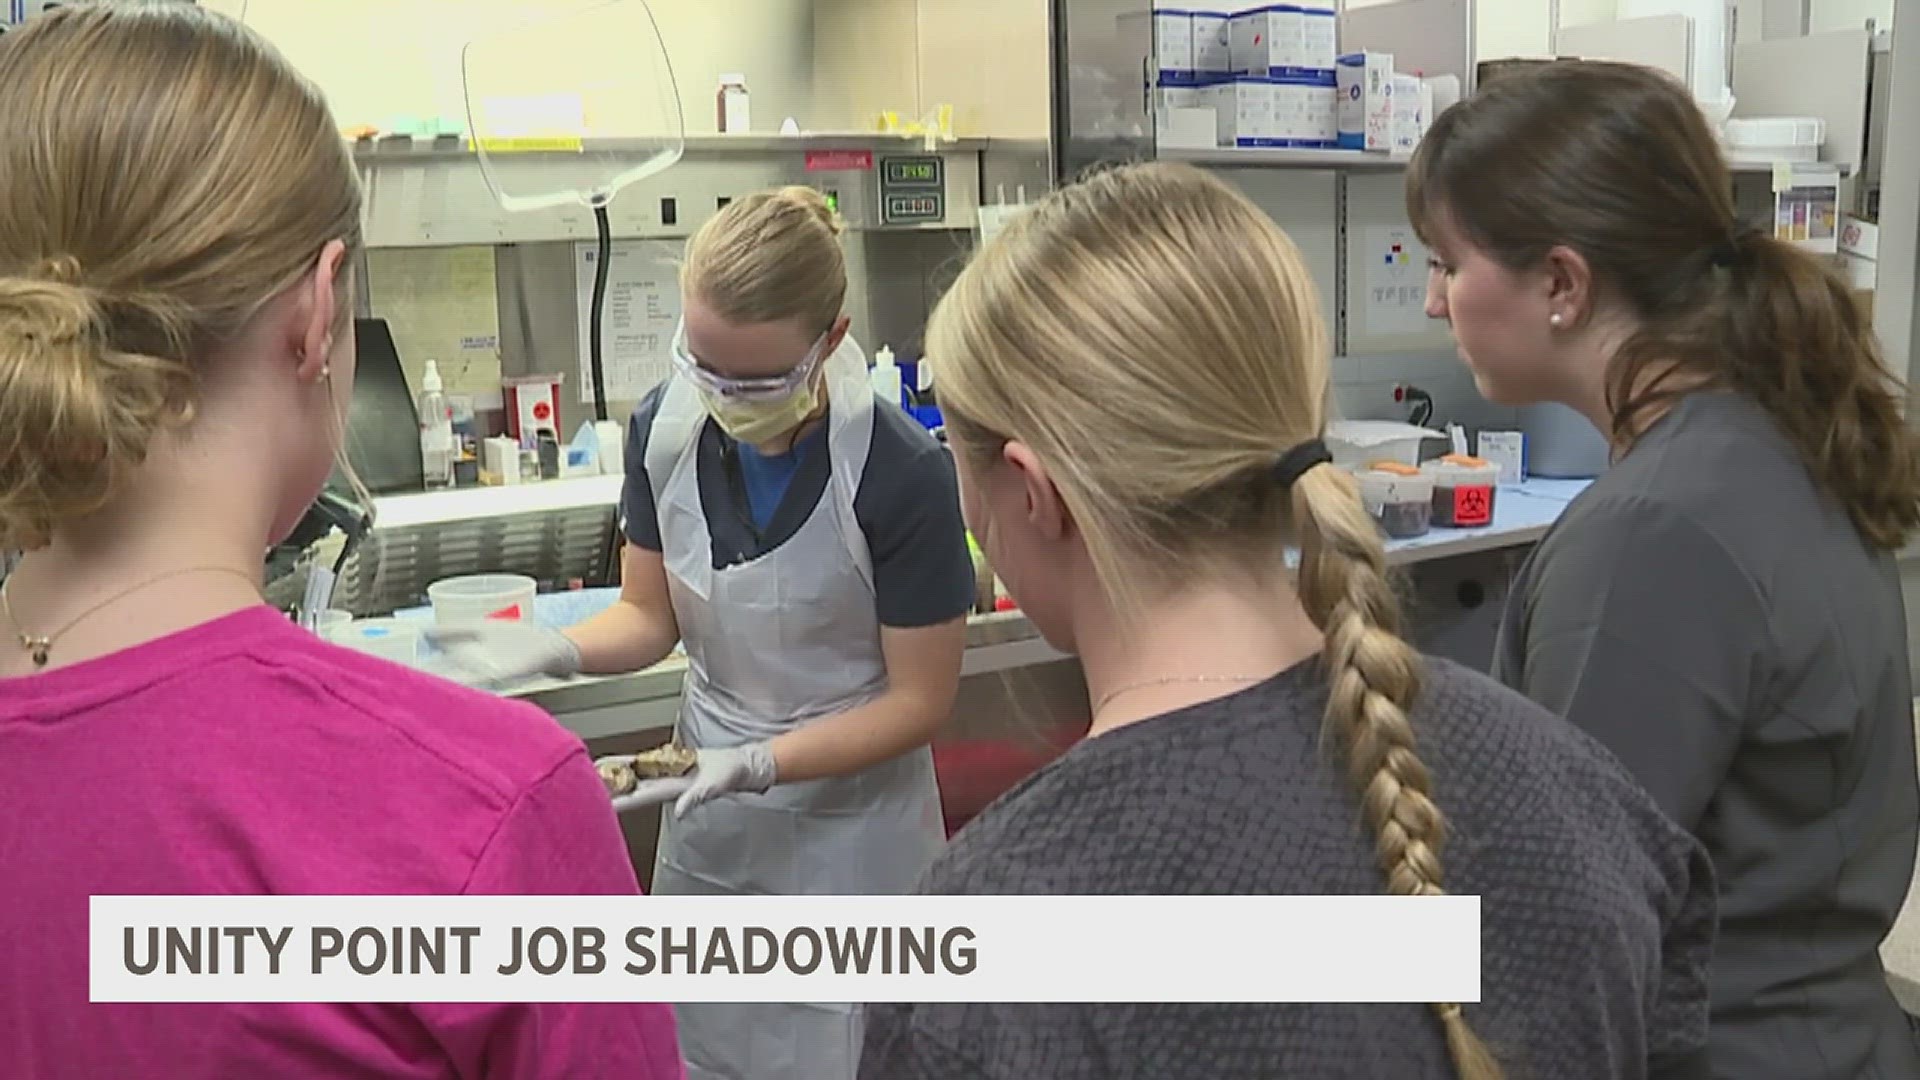 33 students started job shadowing at UnityPoint Health on Wednesday to learn more about working in healthcare.